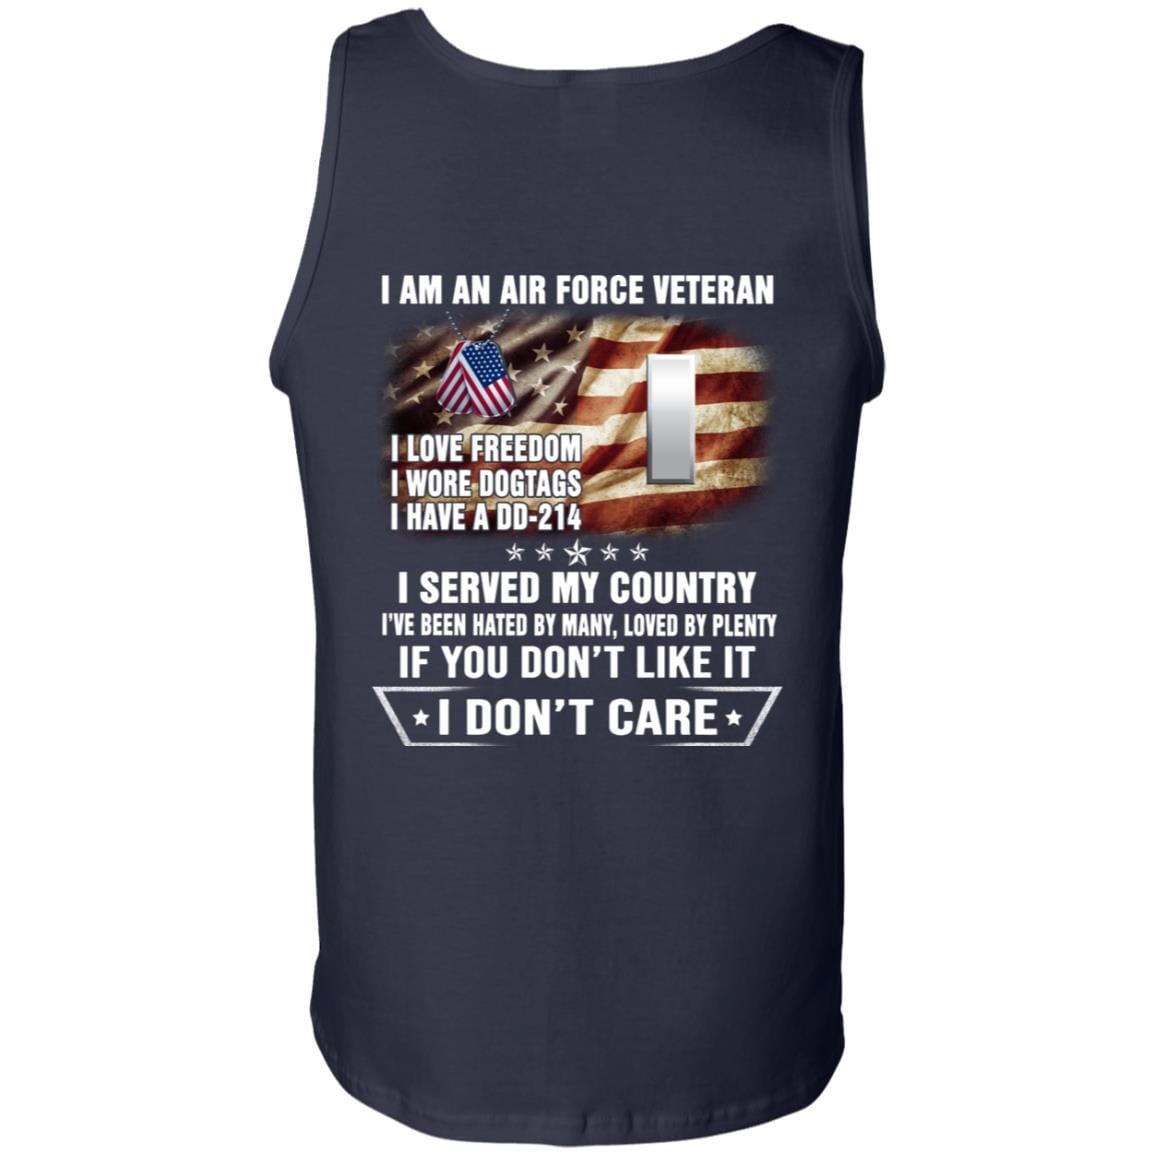 I Am An Air Force O-2 First Lieutenant 1st L O2 Commissioned Officer Ranks Veteran T-Shirt On Back-TShirt-USAF-Veterans Nation